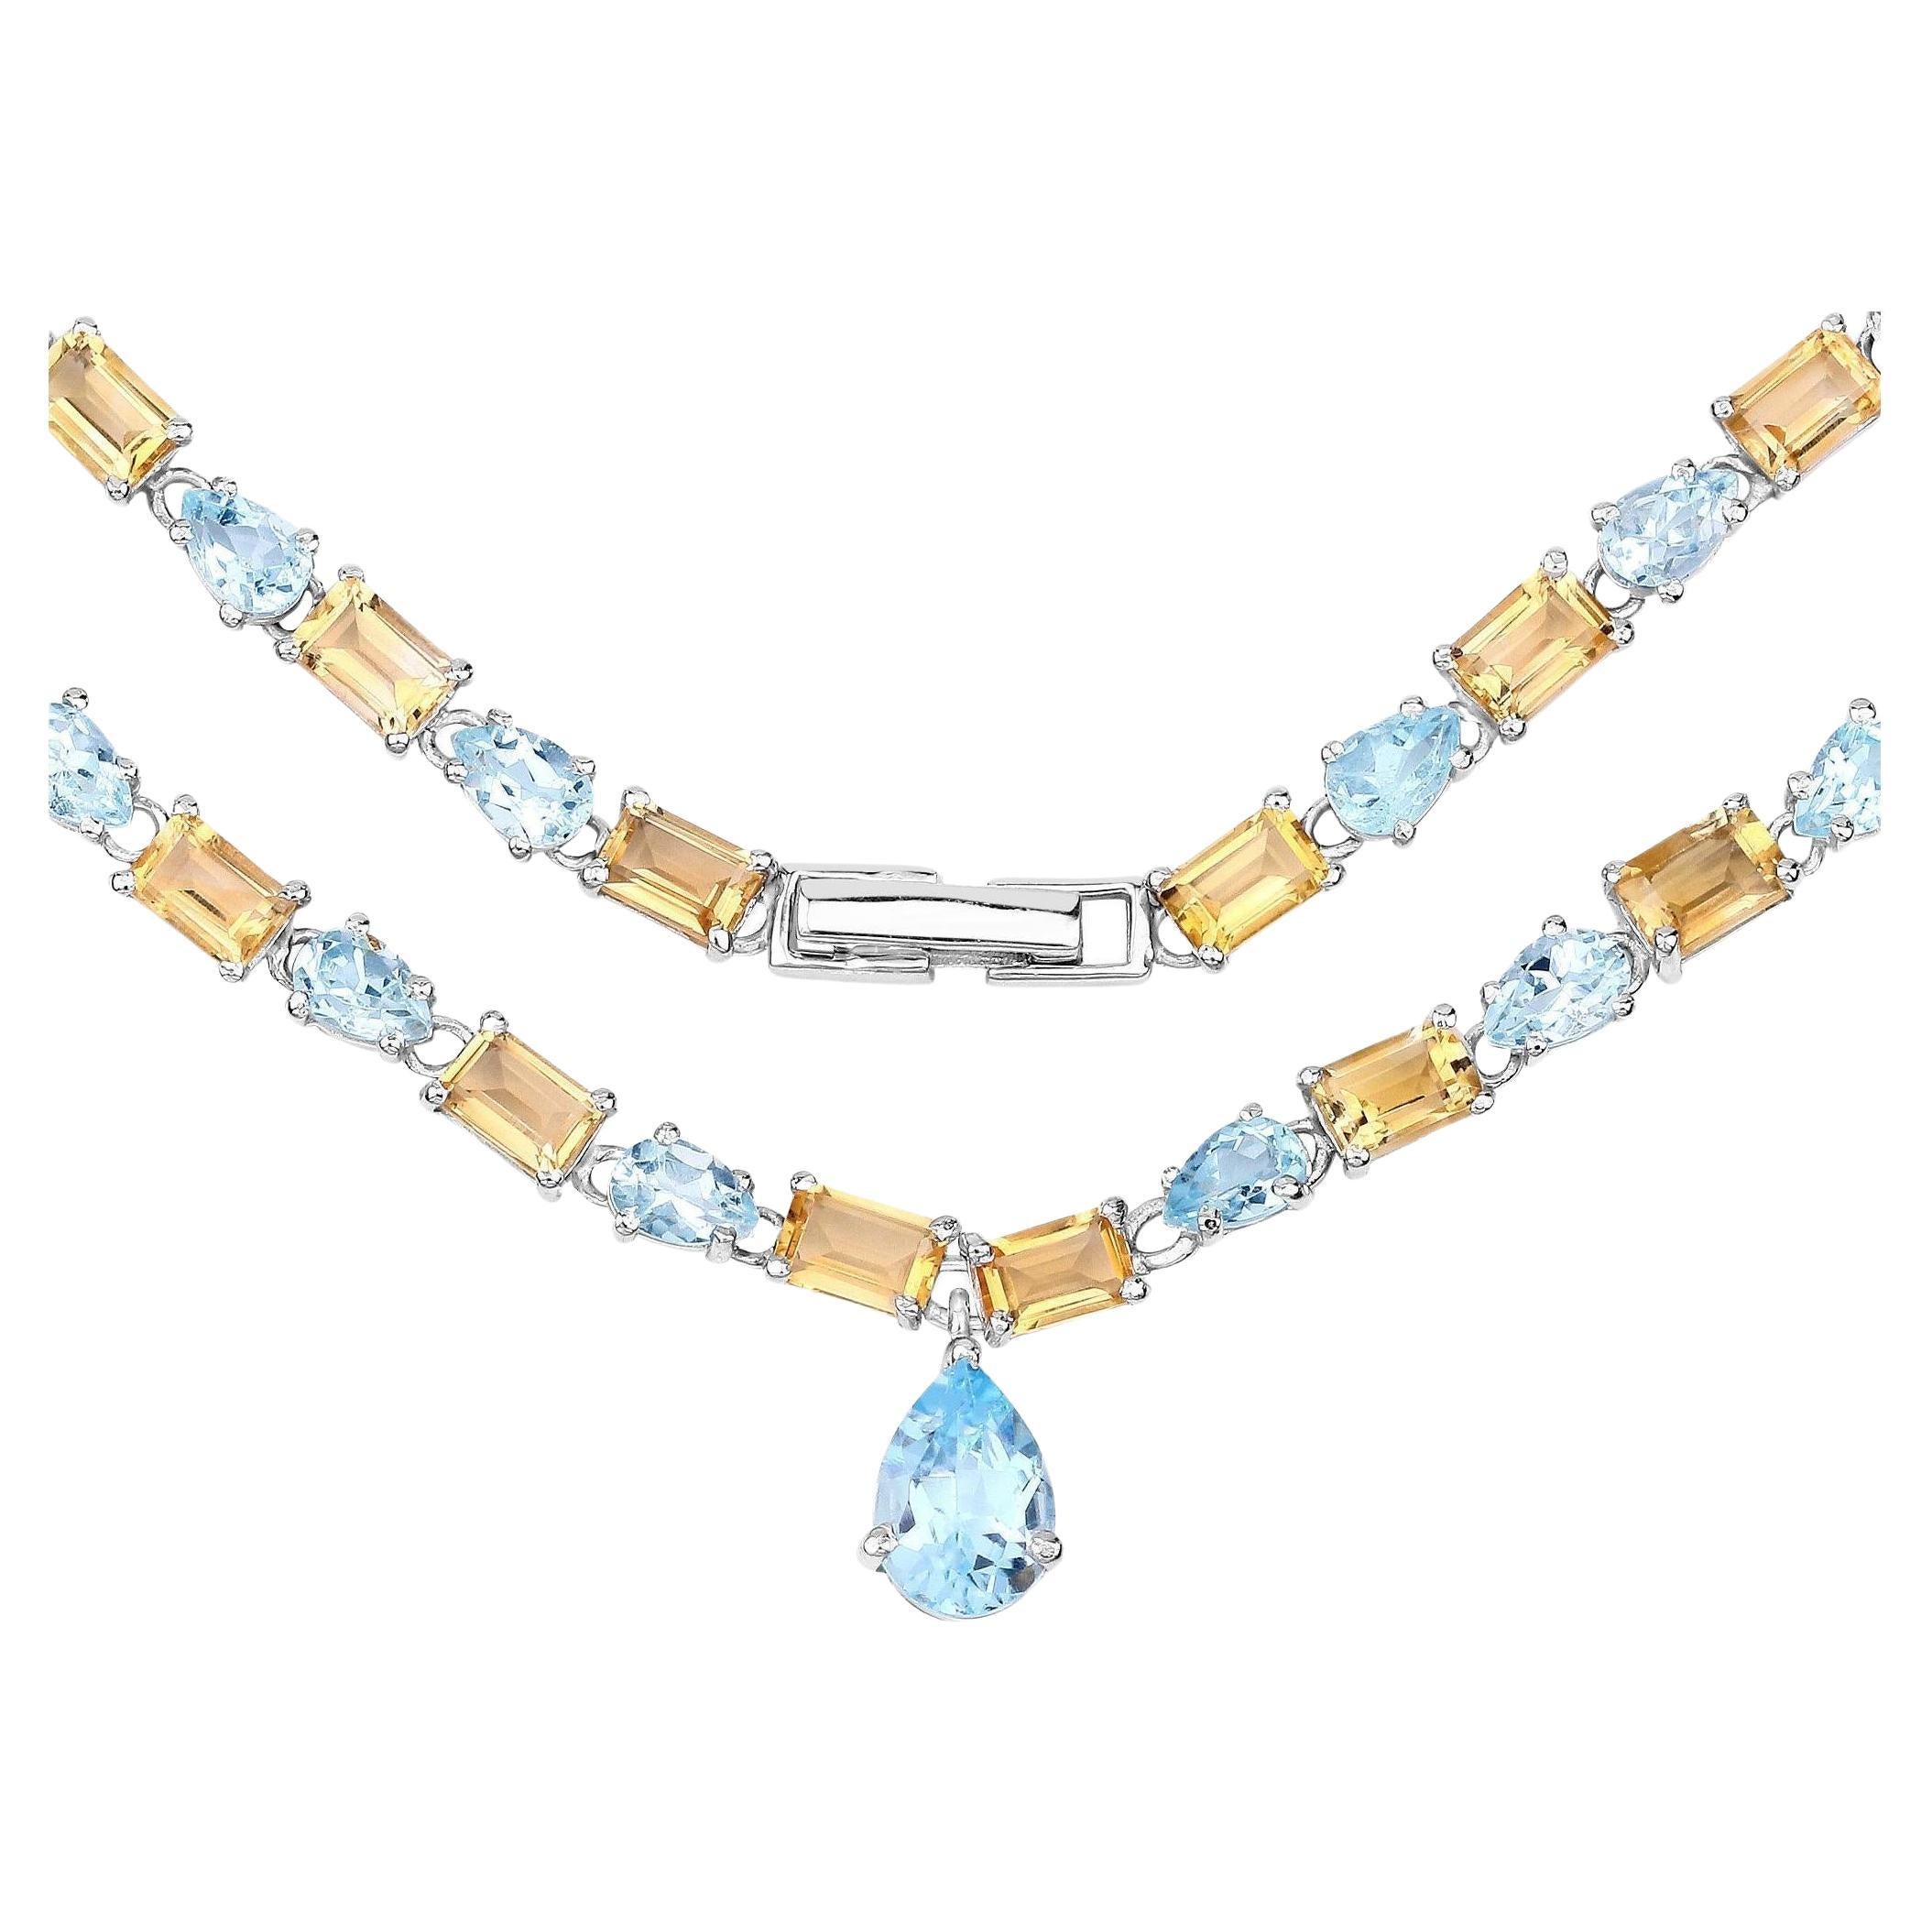 Natural Blue Topaz and Citrine Eternity Necklace 37 Carats Sterling Silver